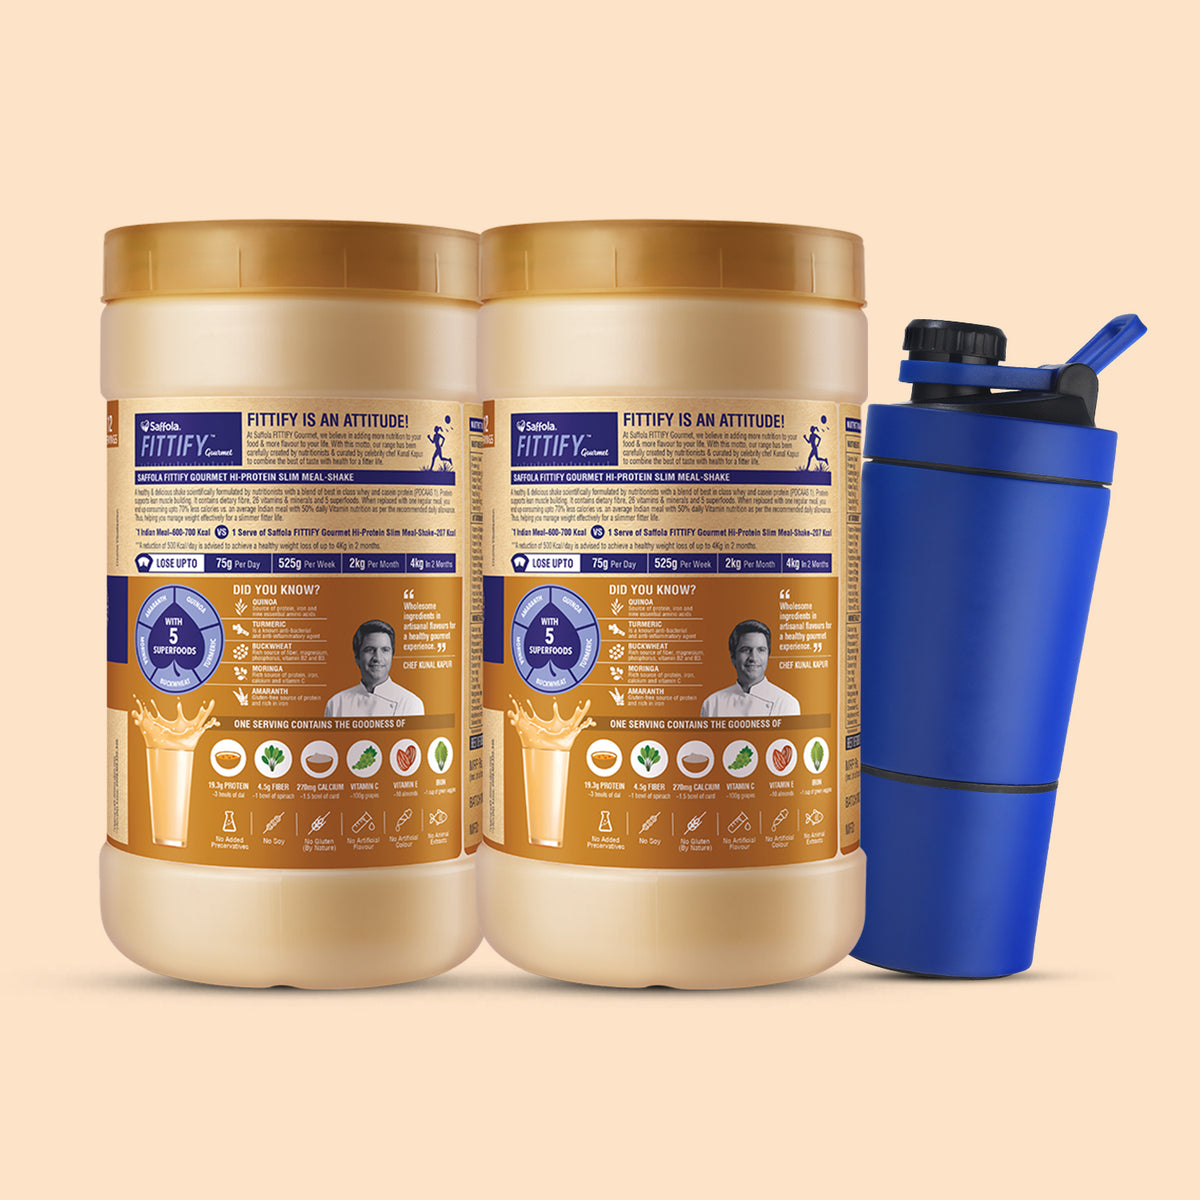 Saffola Fittify Hi-Protein Slim Meal Shake Coffee Caramel BOGO + Metal Blue Shaker With Compartment 500ml Combo